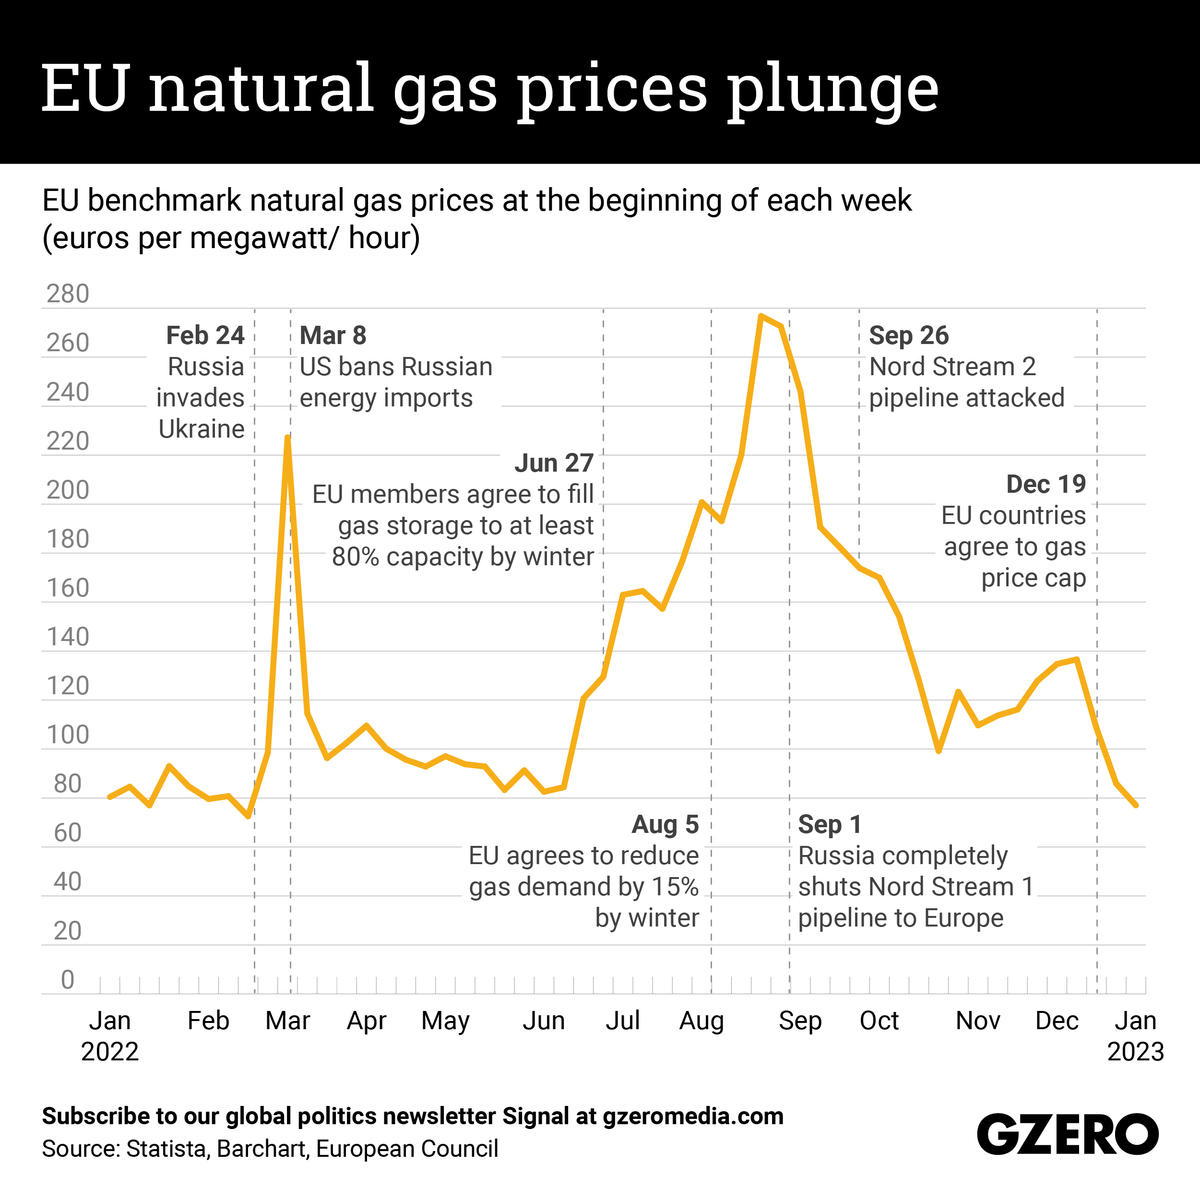 The Graphic Truth: EU natural gas prices plunge